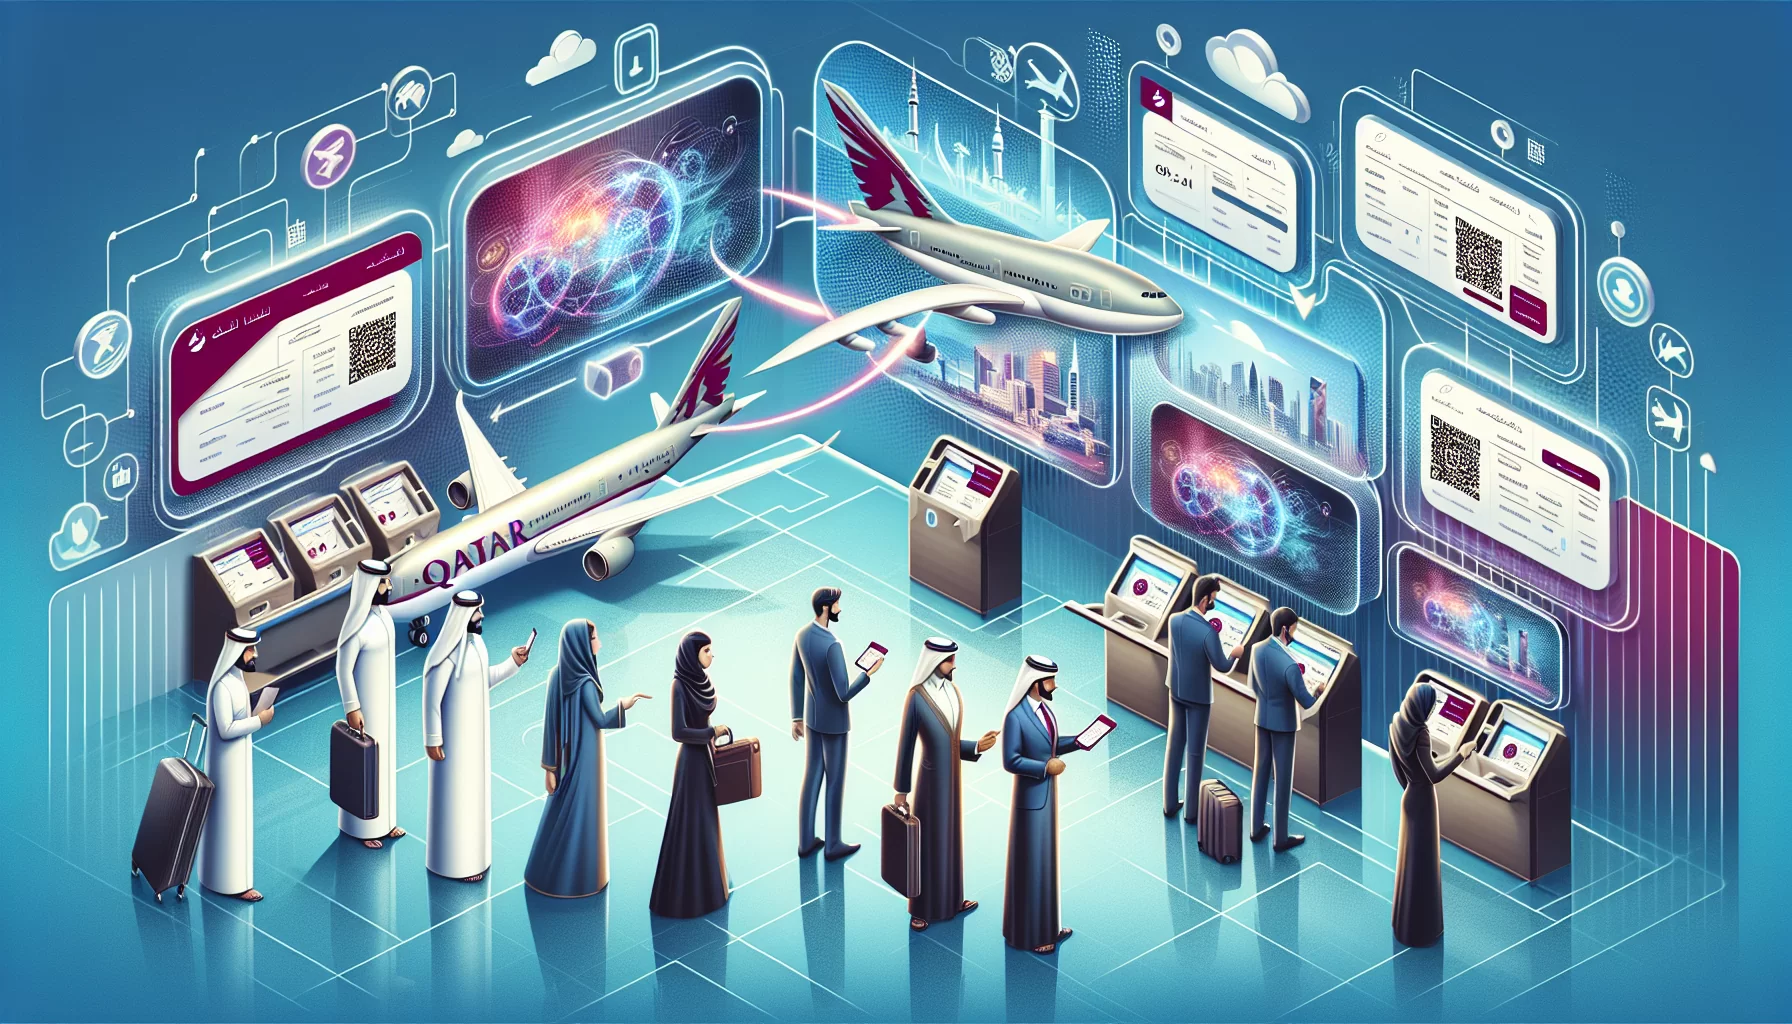 Qatar airlines transforms passenger experience with digital documentation system